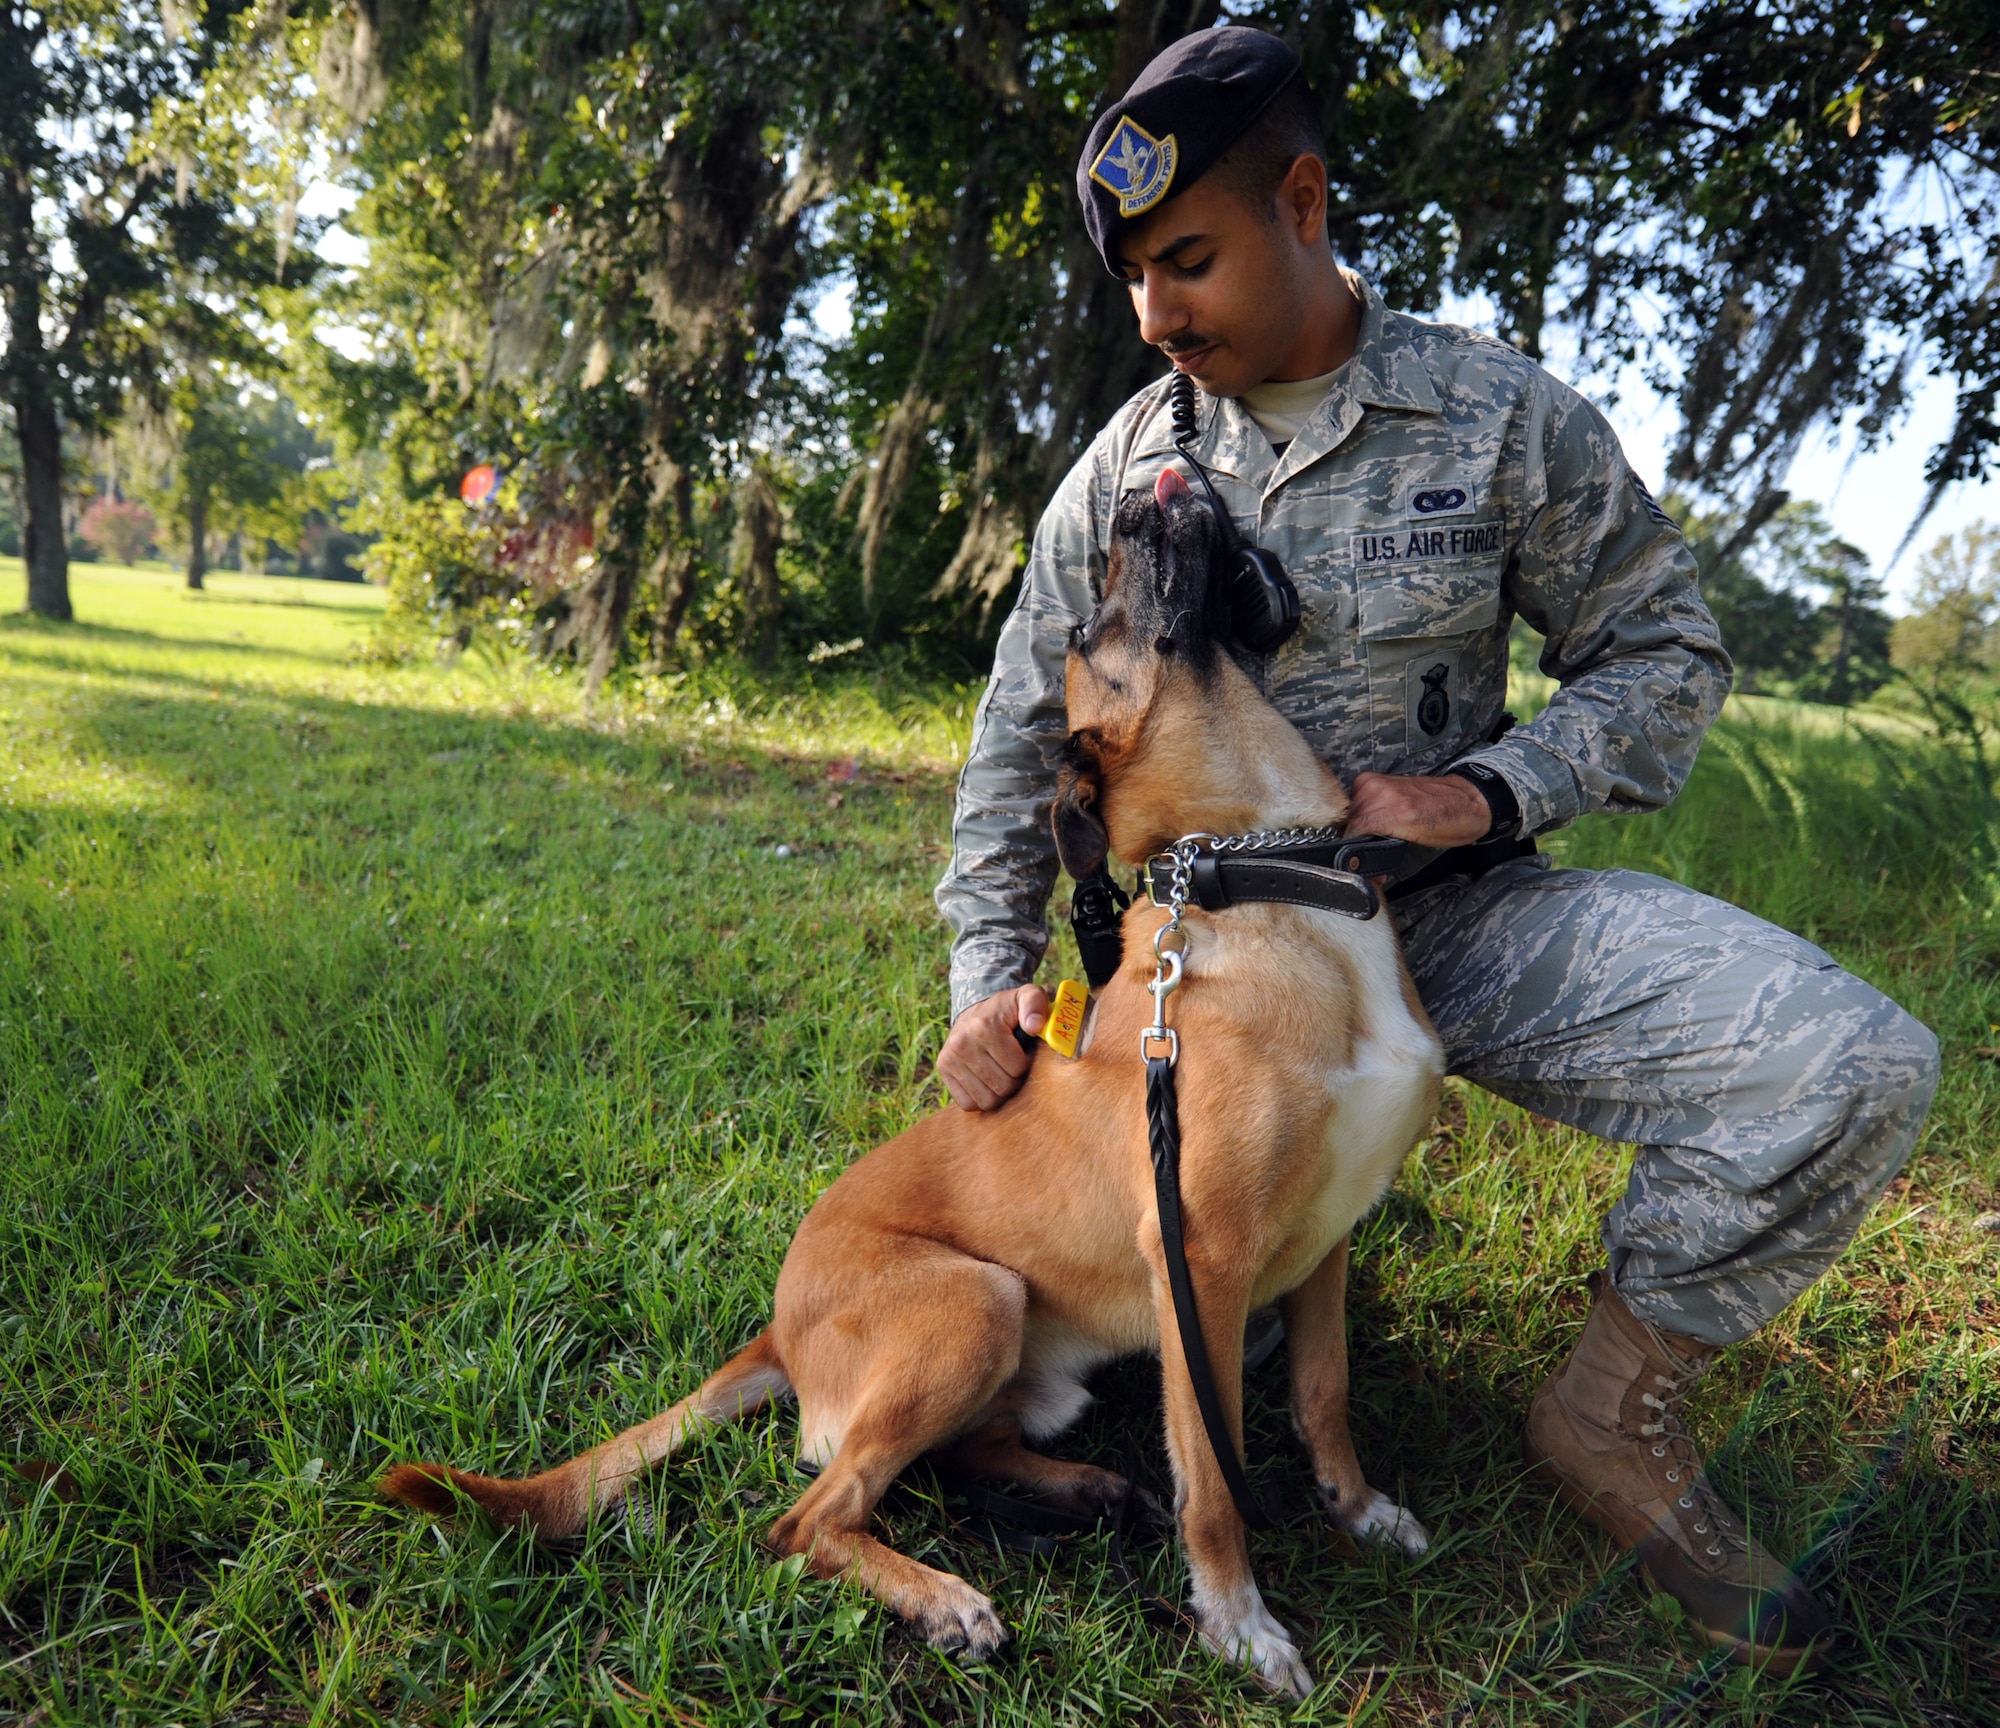 U.S. Air Force Staff Sgt. Fazel Munshi grooms his military working dog Arton in the shade near the MWD compound Aug. 20, 2010, on Joint Base Charleston, S.C. Grooming and hygiene is one of the most important parts of building rapport between the MWD and handler. Sergeant Munshi is a dog handler with the 628th Security Forces Squadron. (U.S. Air Force photo/Senior Airman Timothy Taylor)